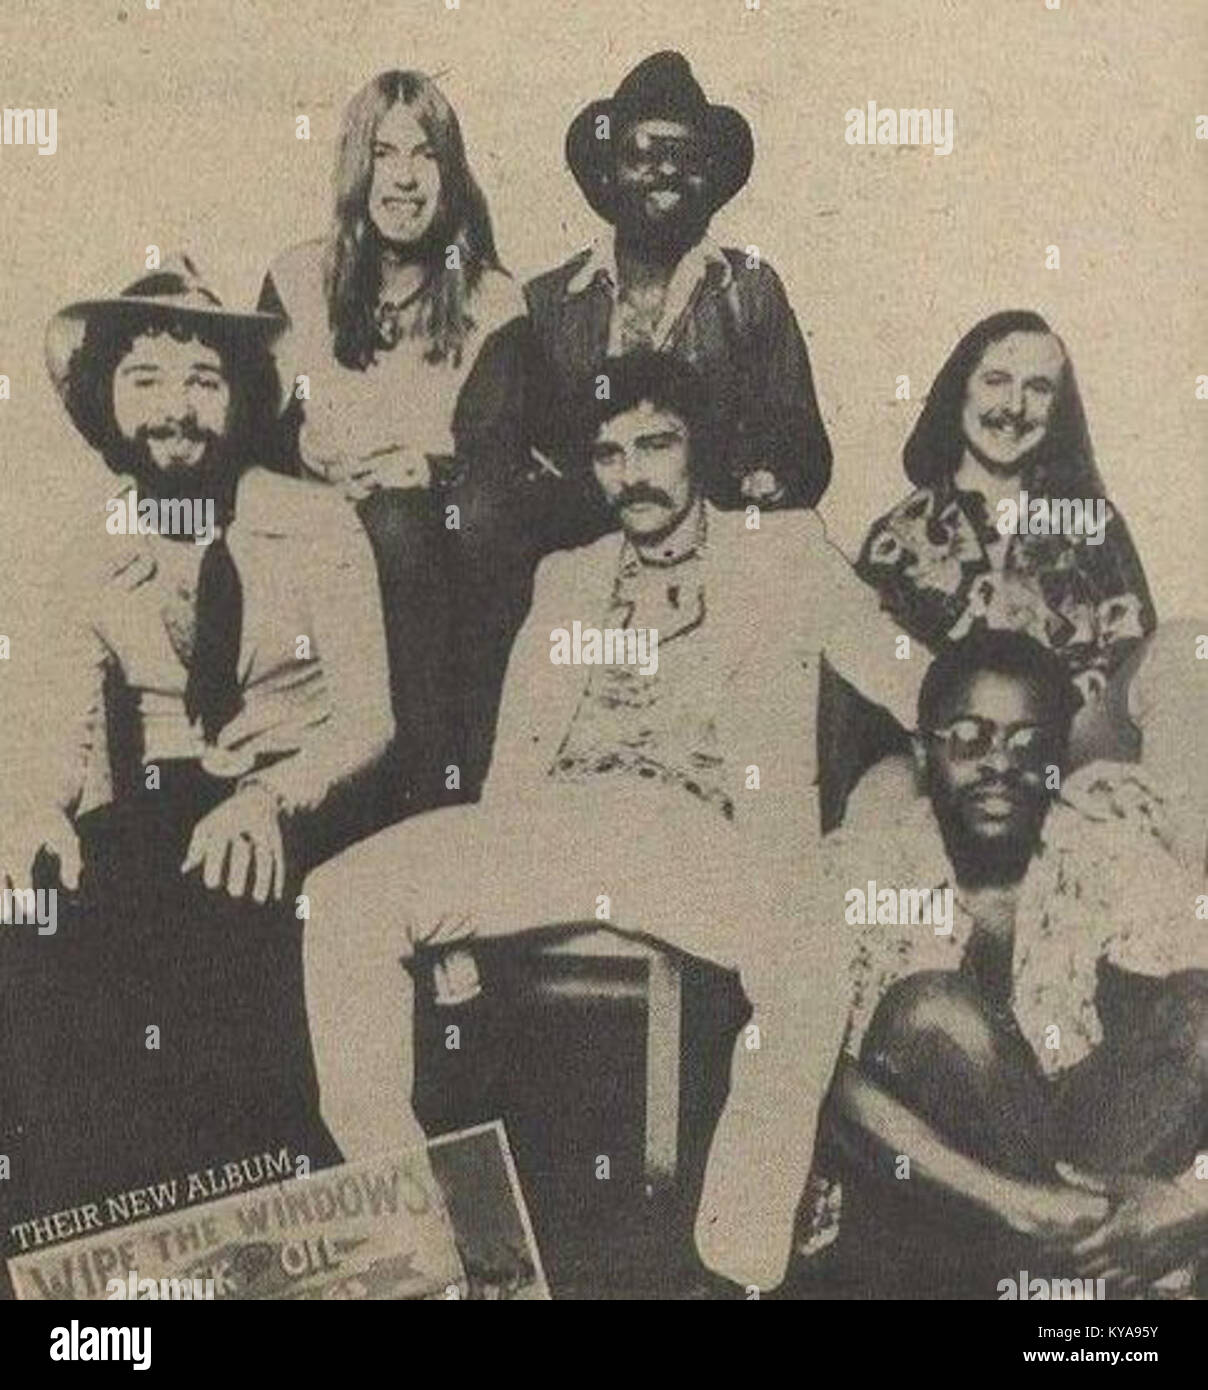 The Allman Brothers Band (1976) Stock Photo